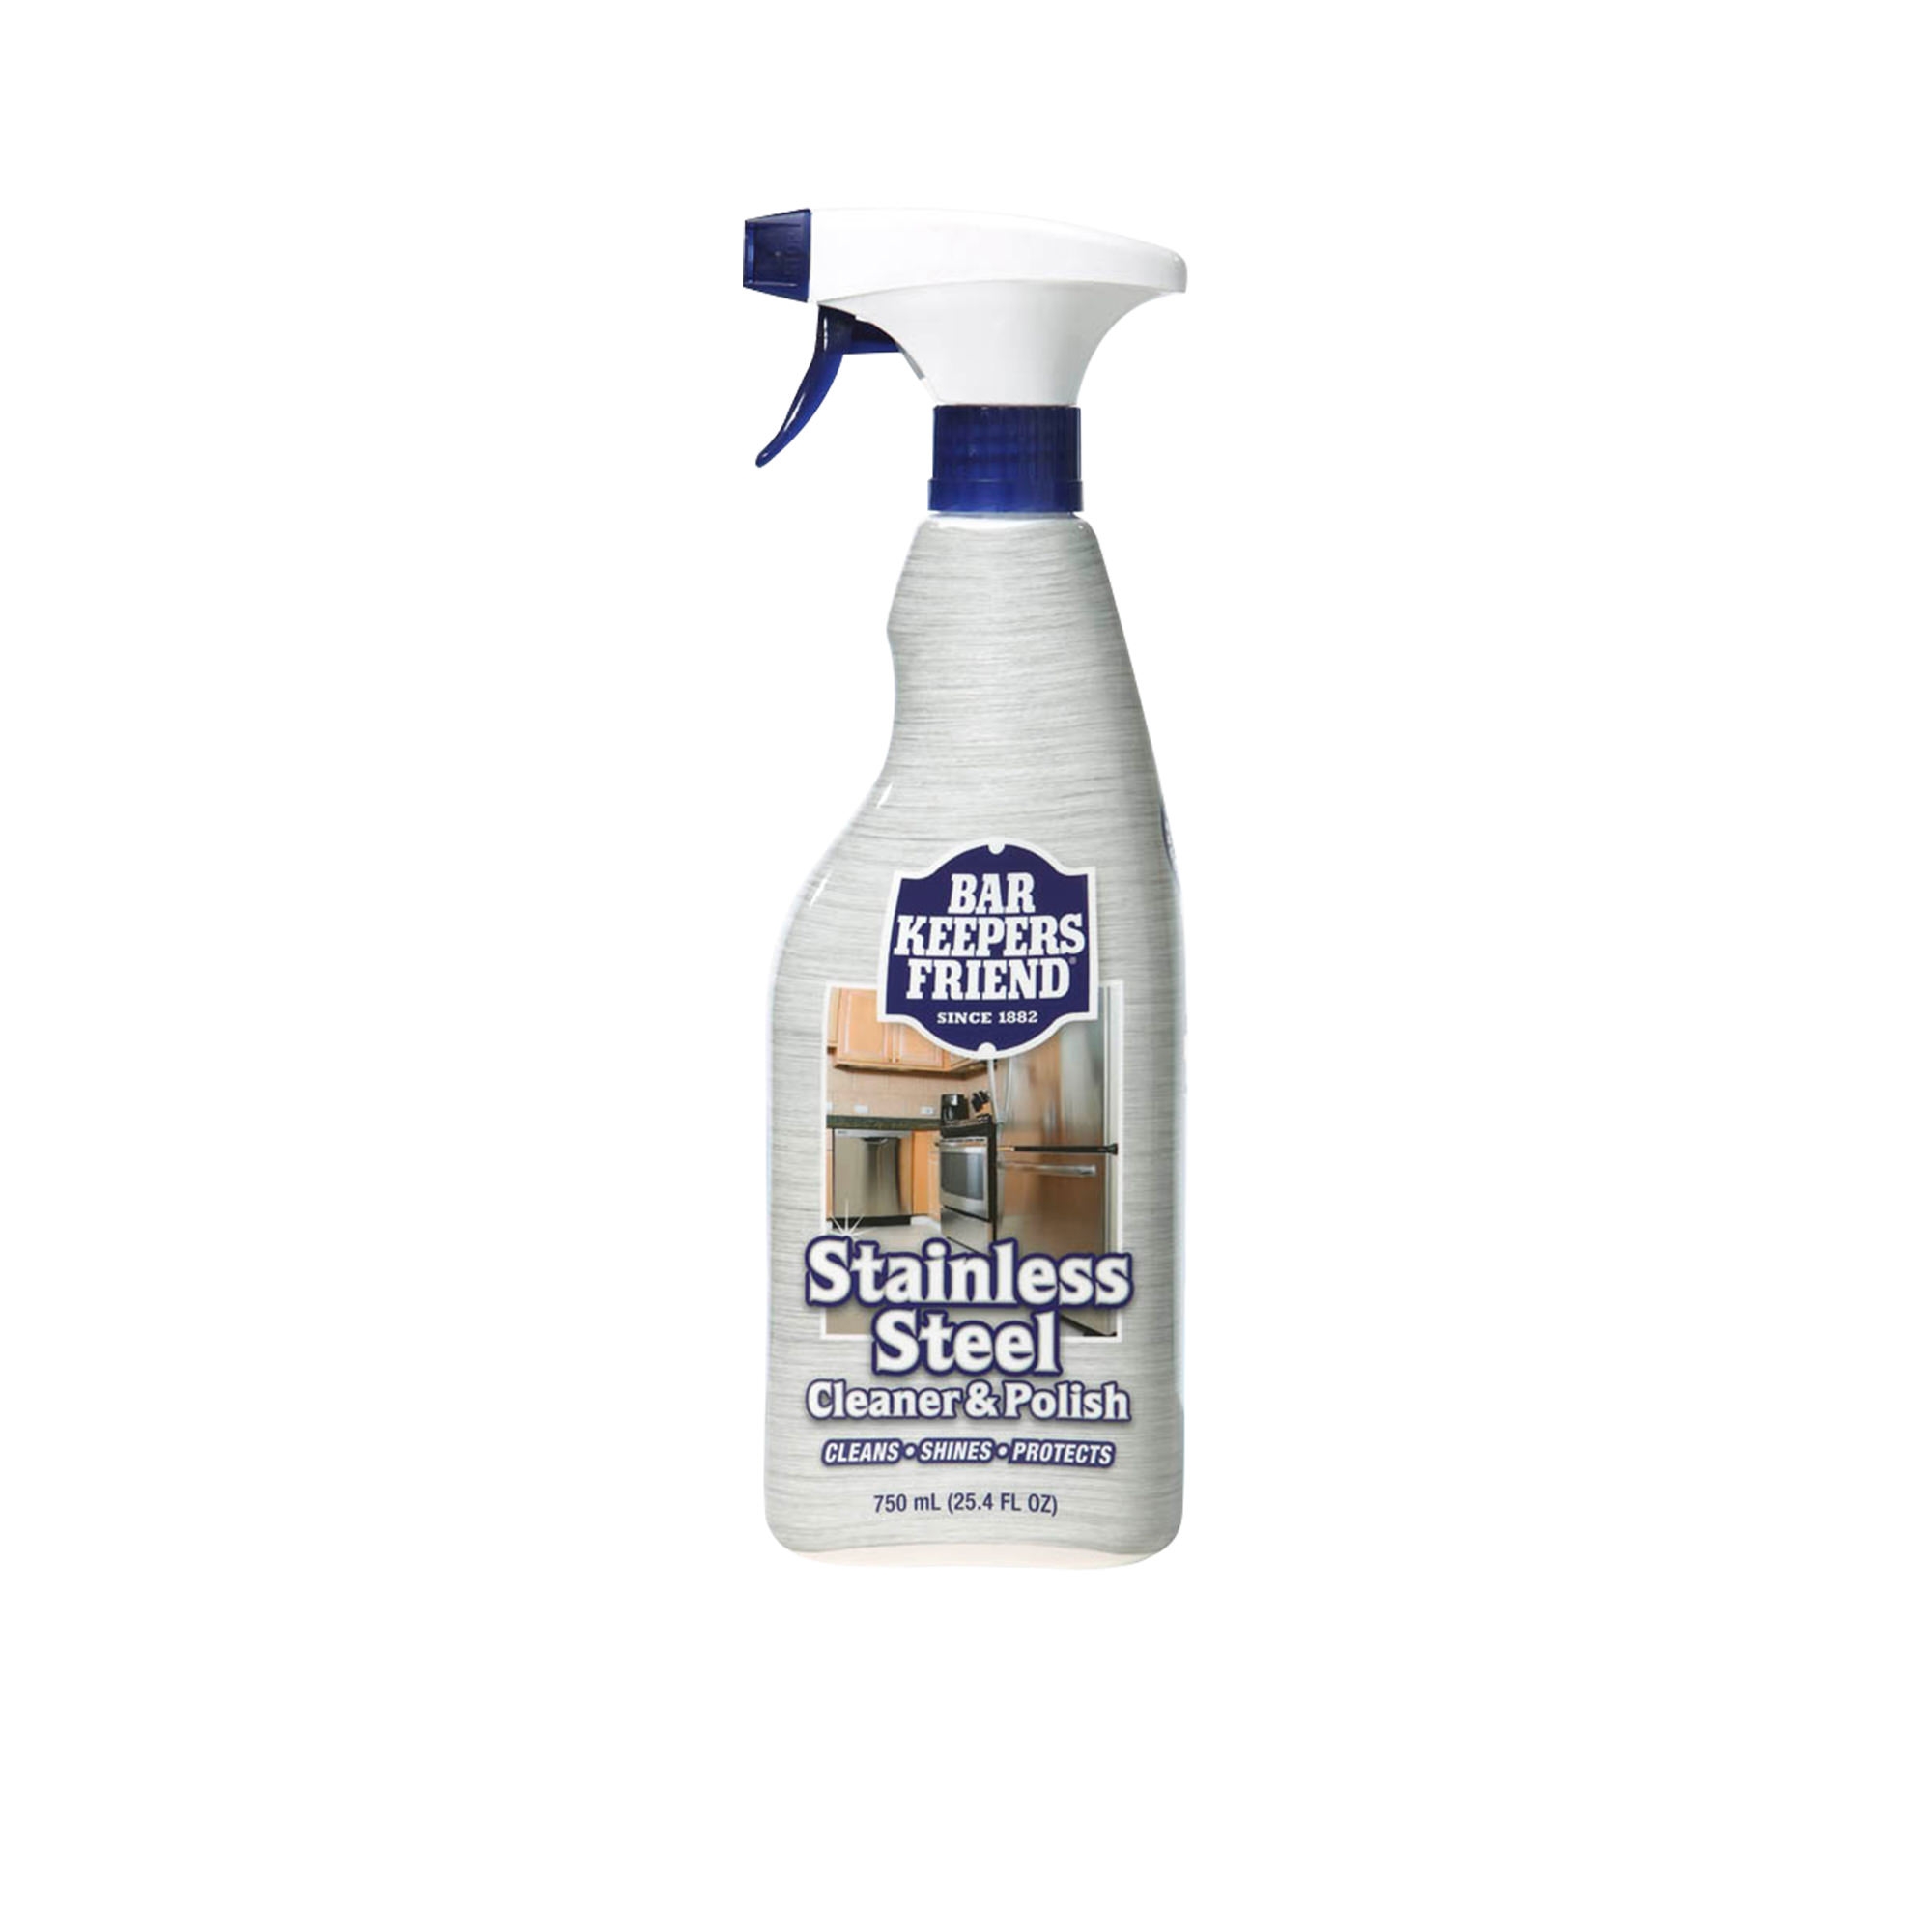 Bar Keepers Friend Stainless Steel Cleaner & Polish Spray 750ml Image 1